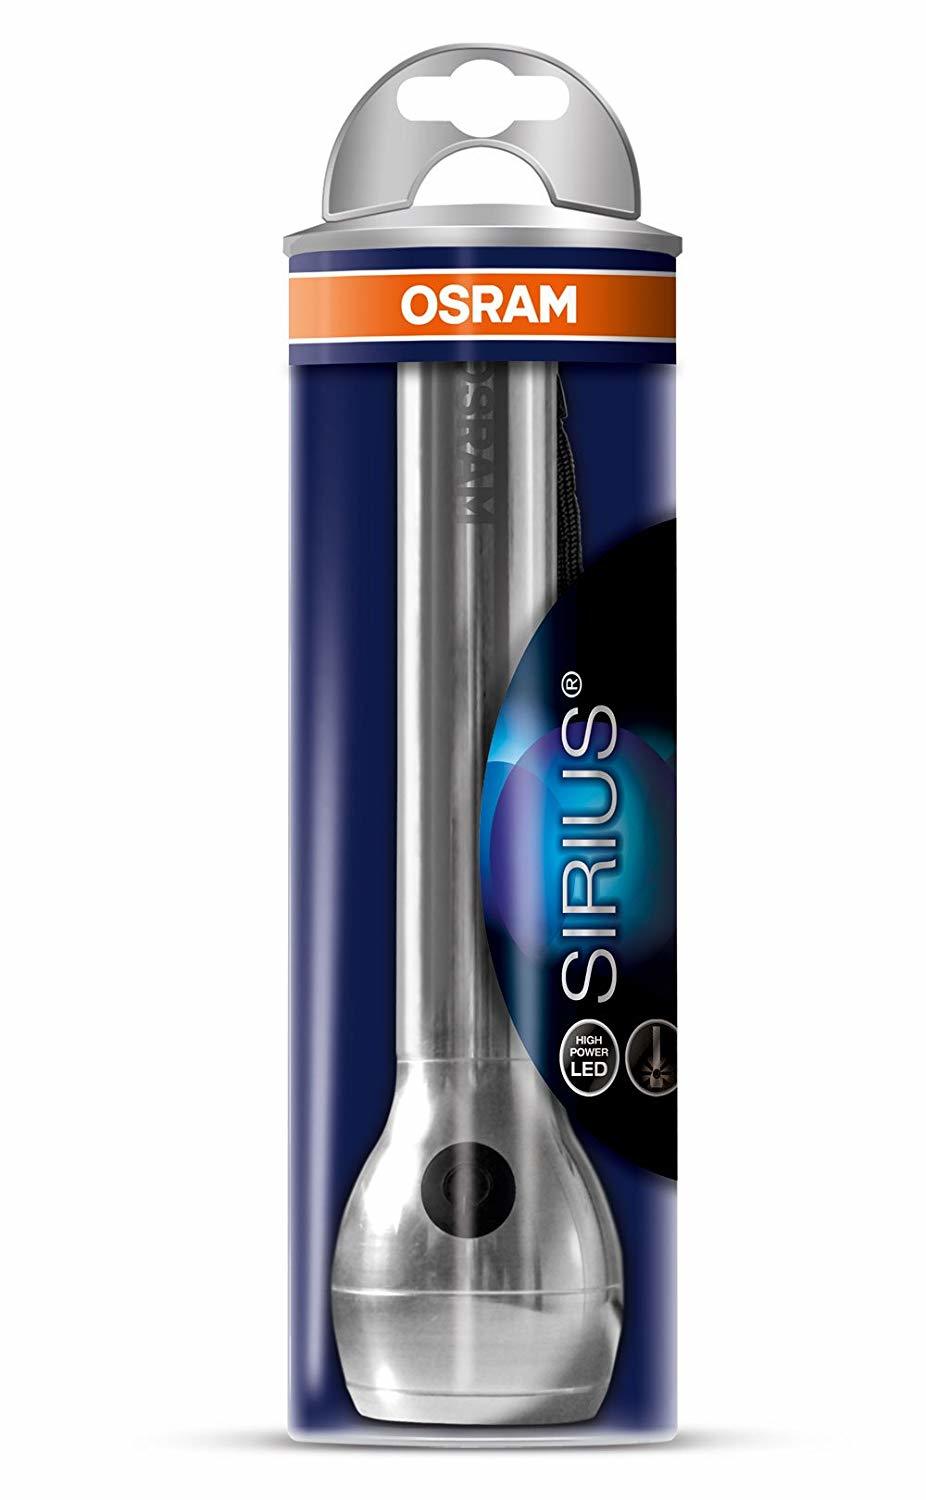 Relaunch OSRAM Torches